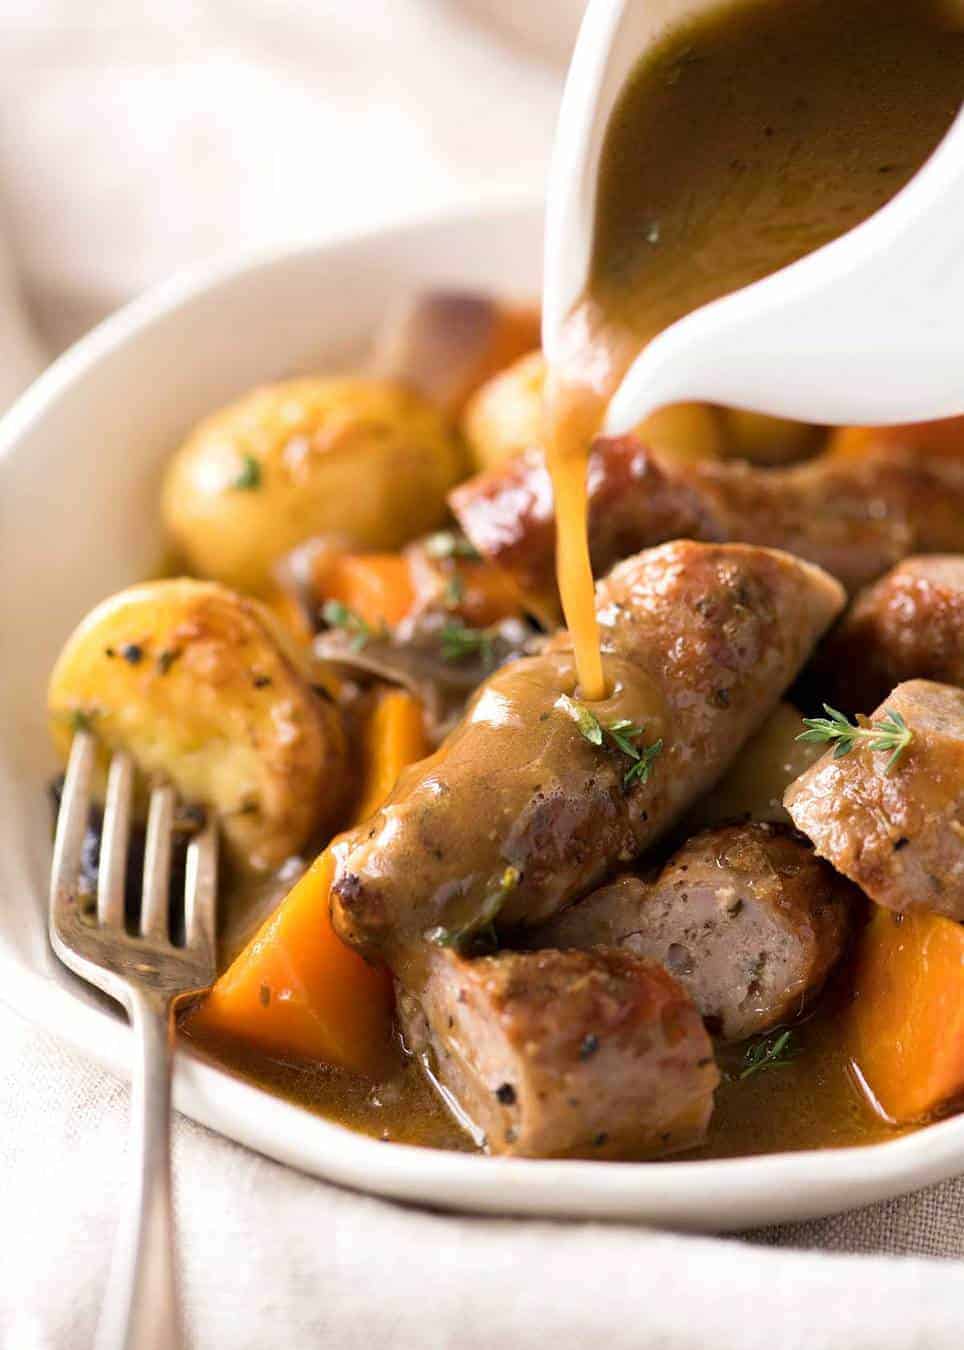 Sausage Bake and Vegetables with Gravy - baked in one pan! recipetineats.com